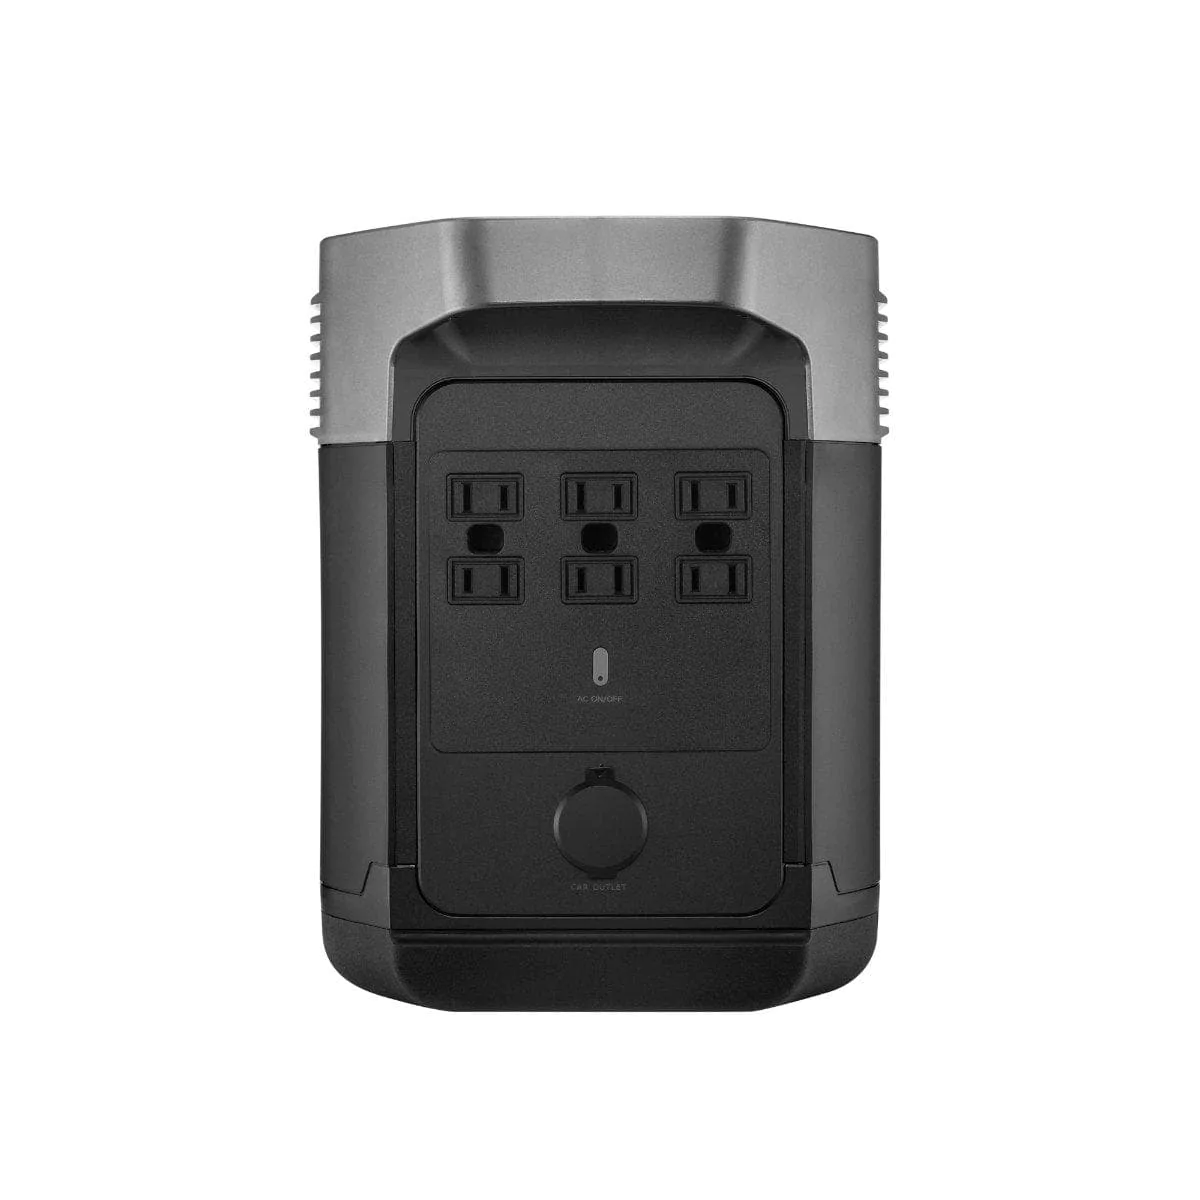 EcoFlow DELTA Portable Power Station - The Ultimate Solution for Backup Power, RV Living, and Outdoor Adventures